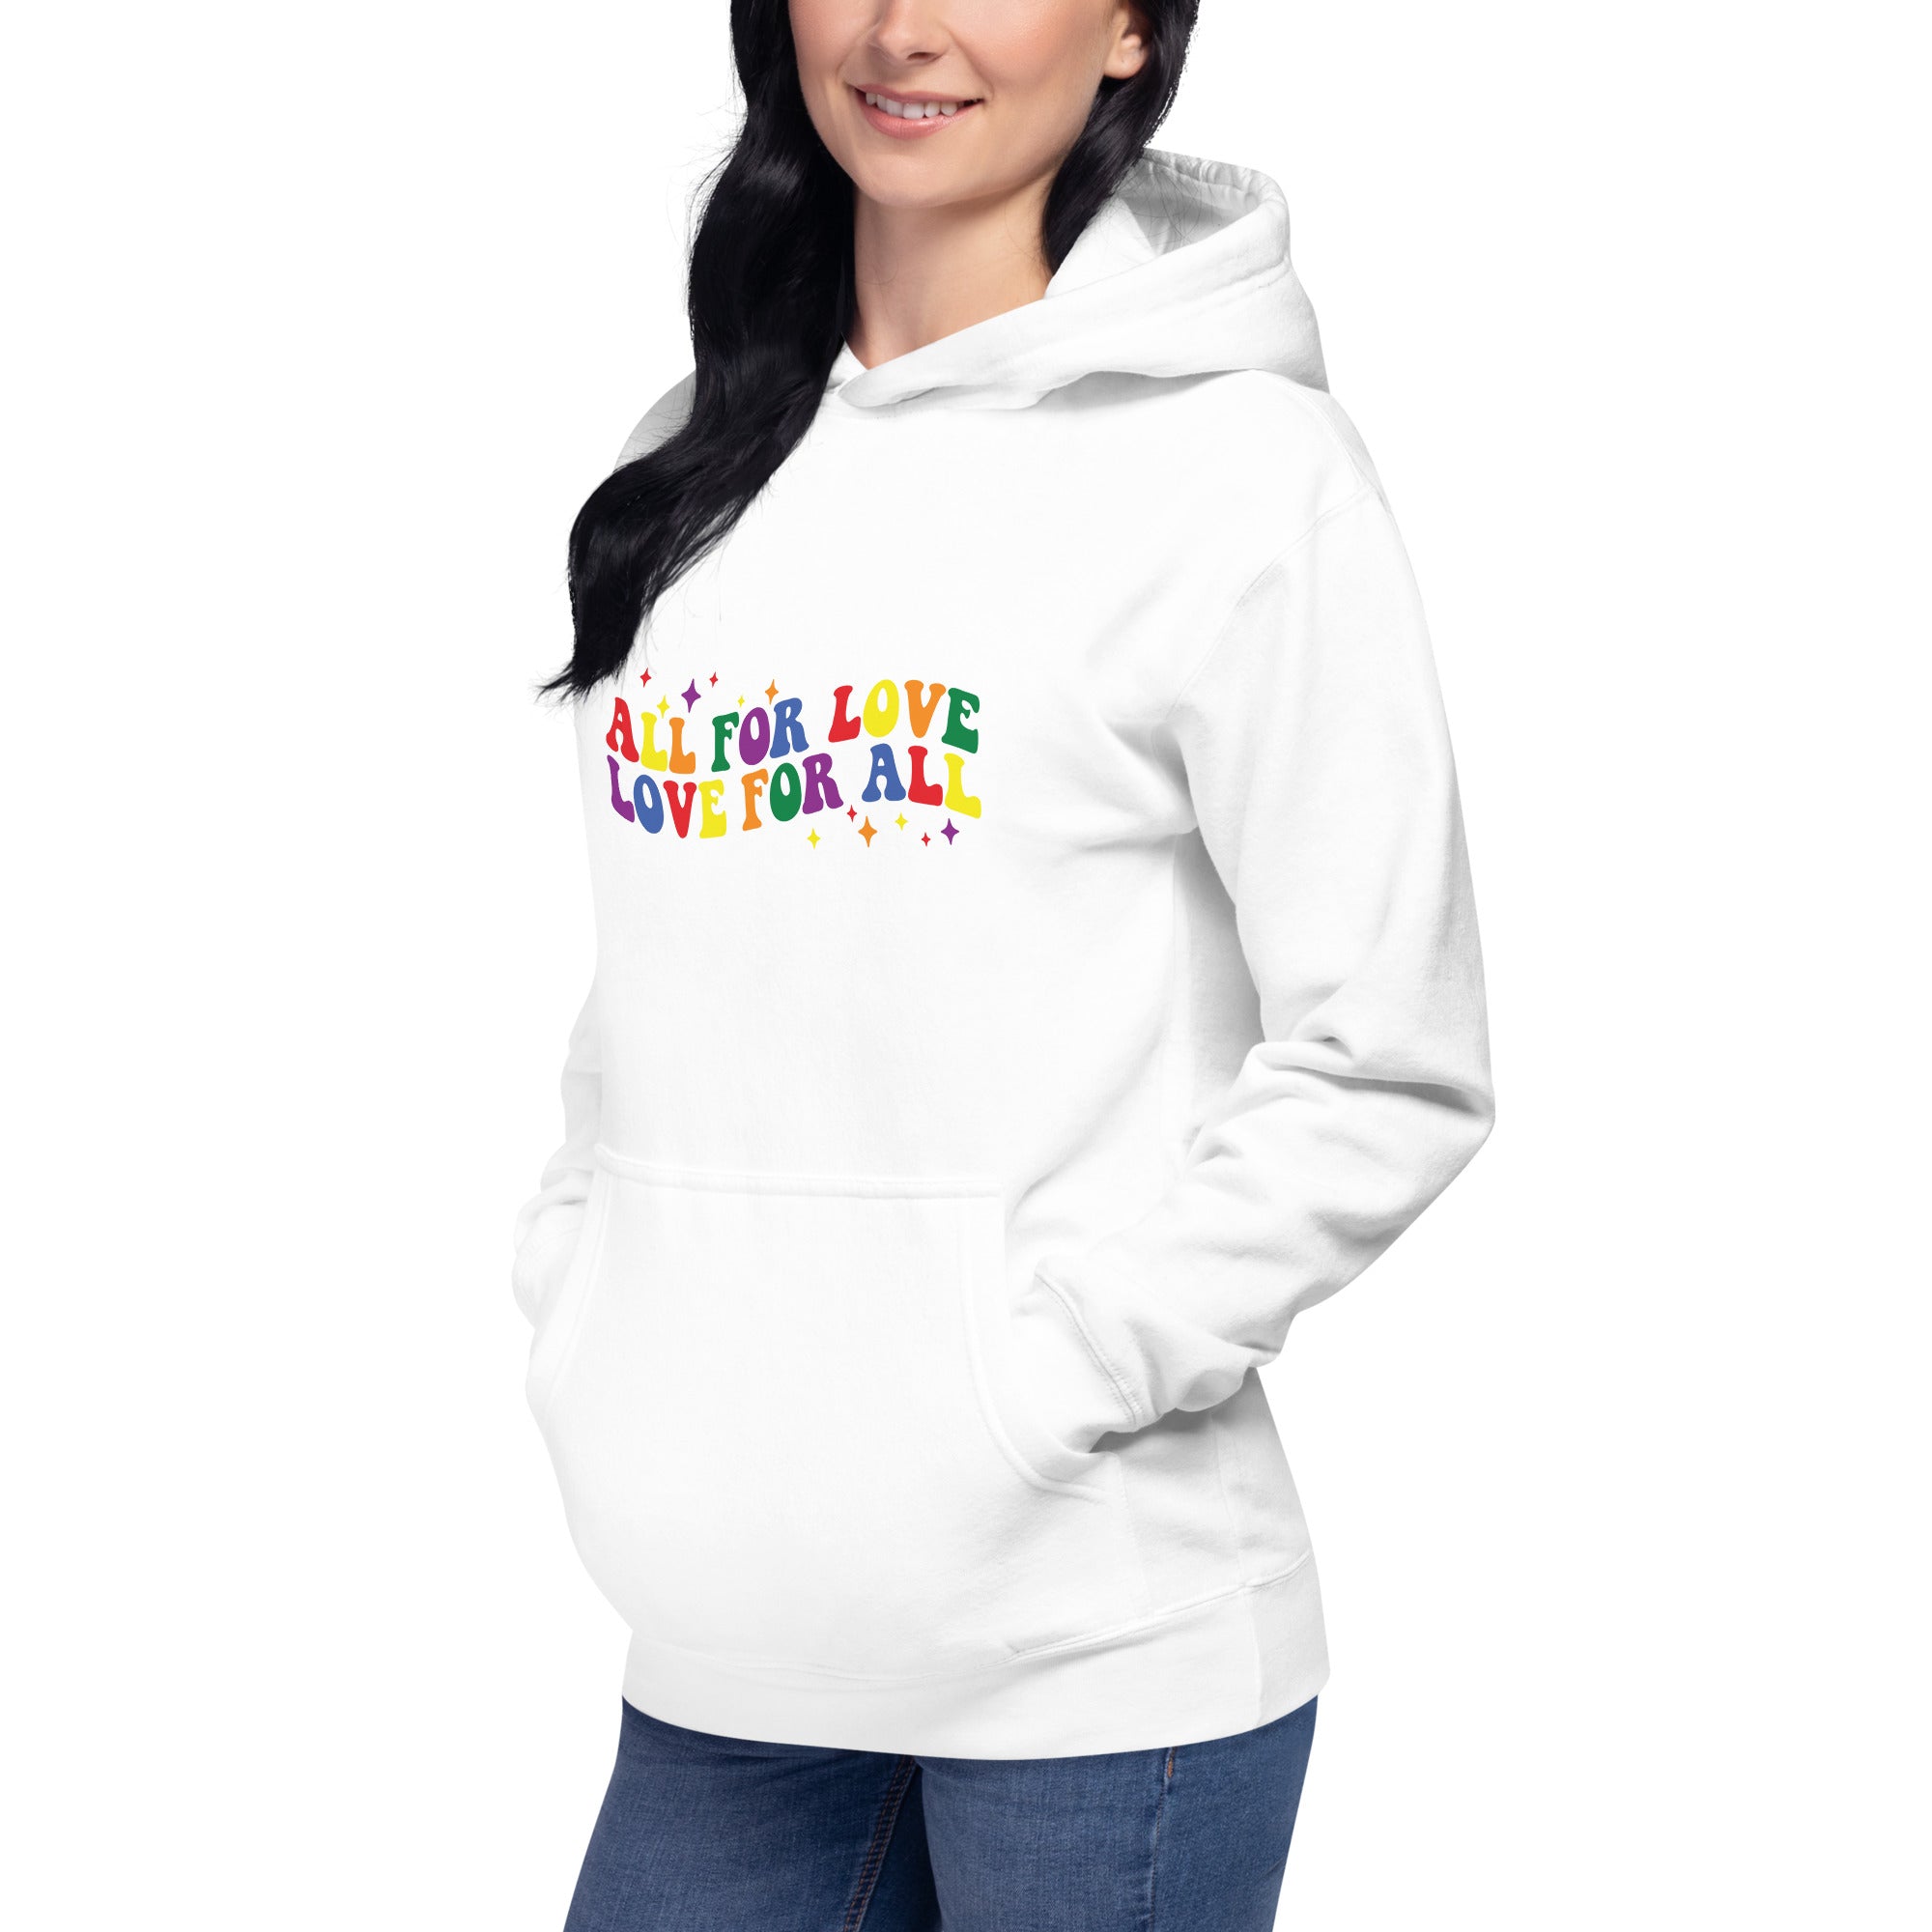 Unisex Hoodie- All for love, love for all